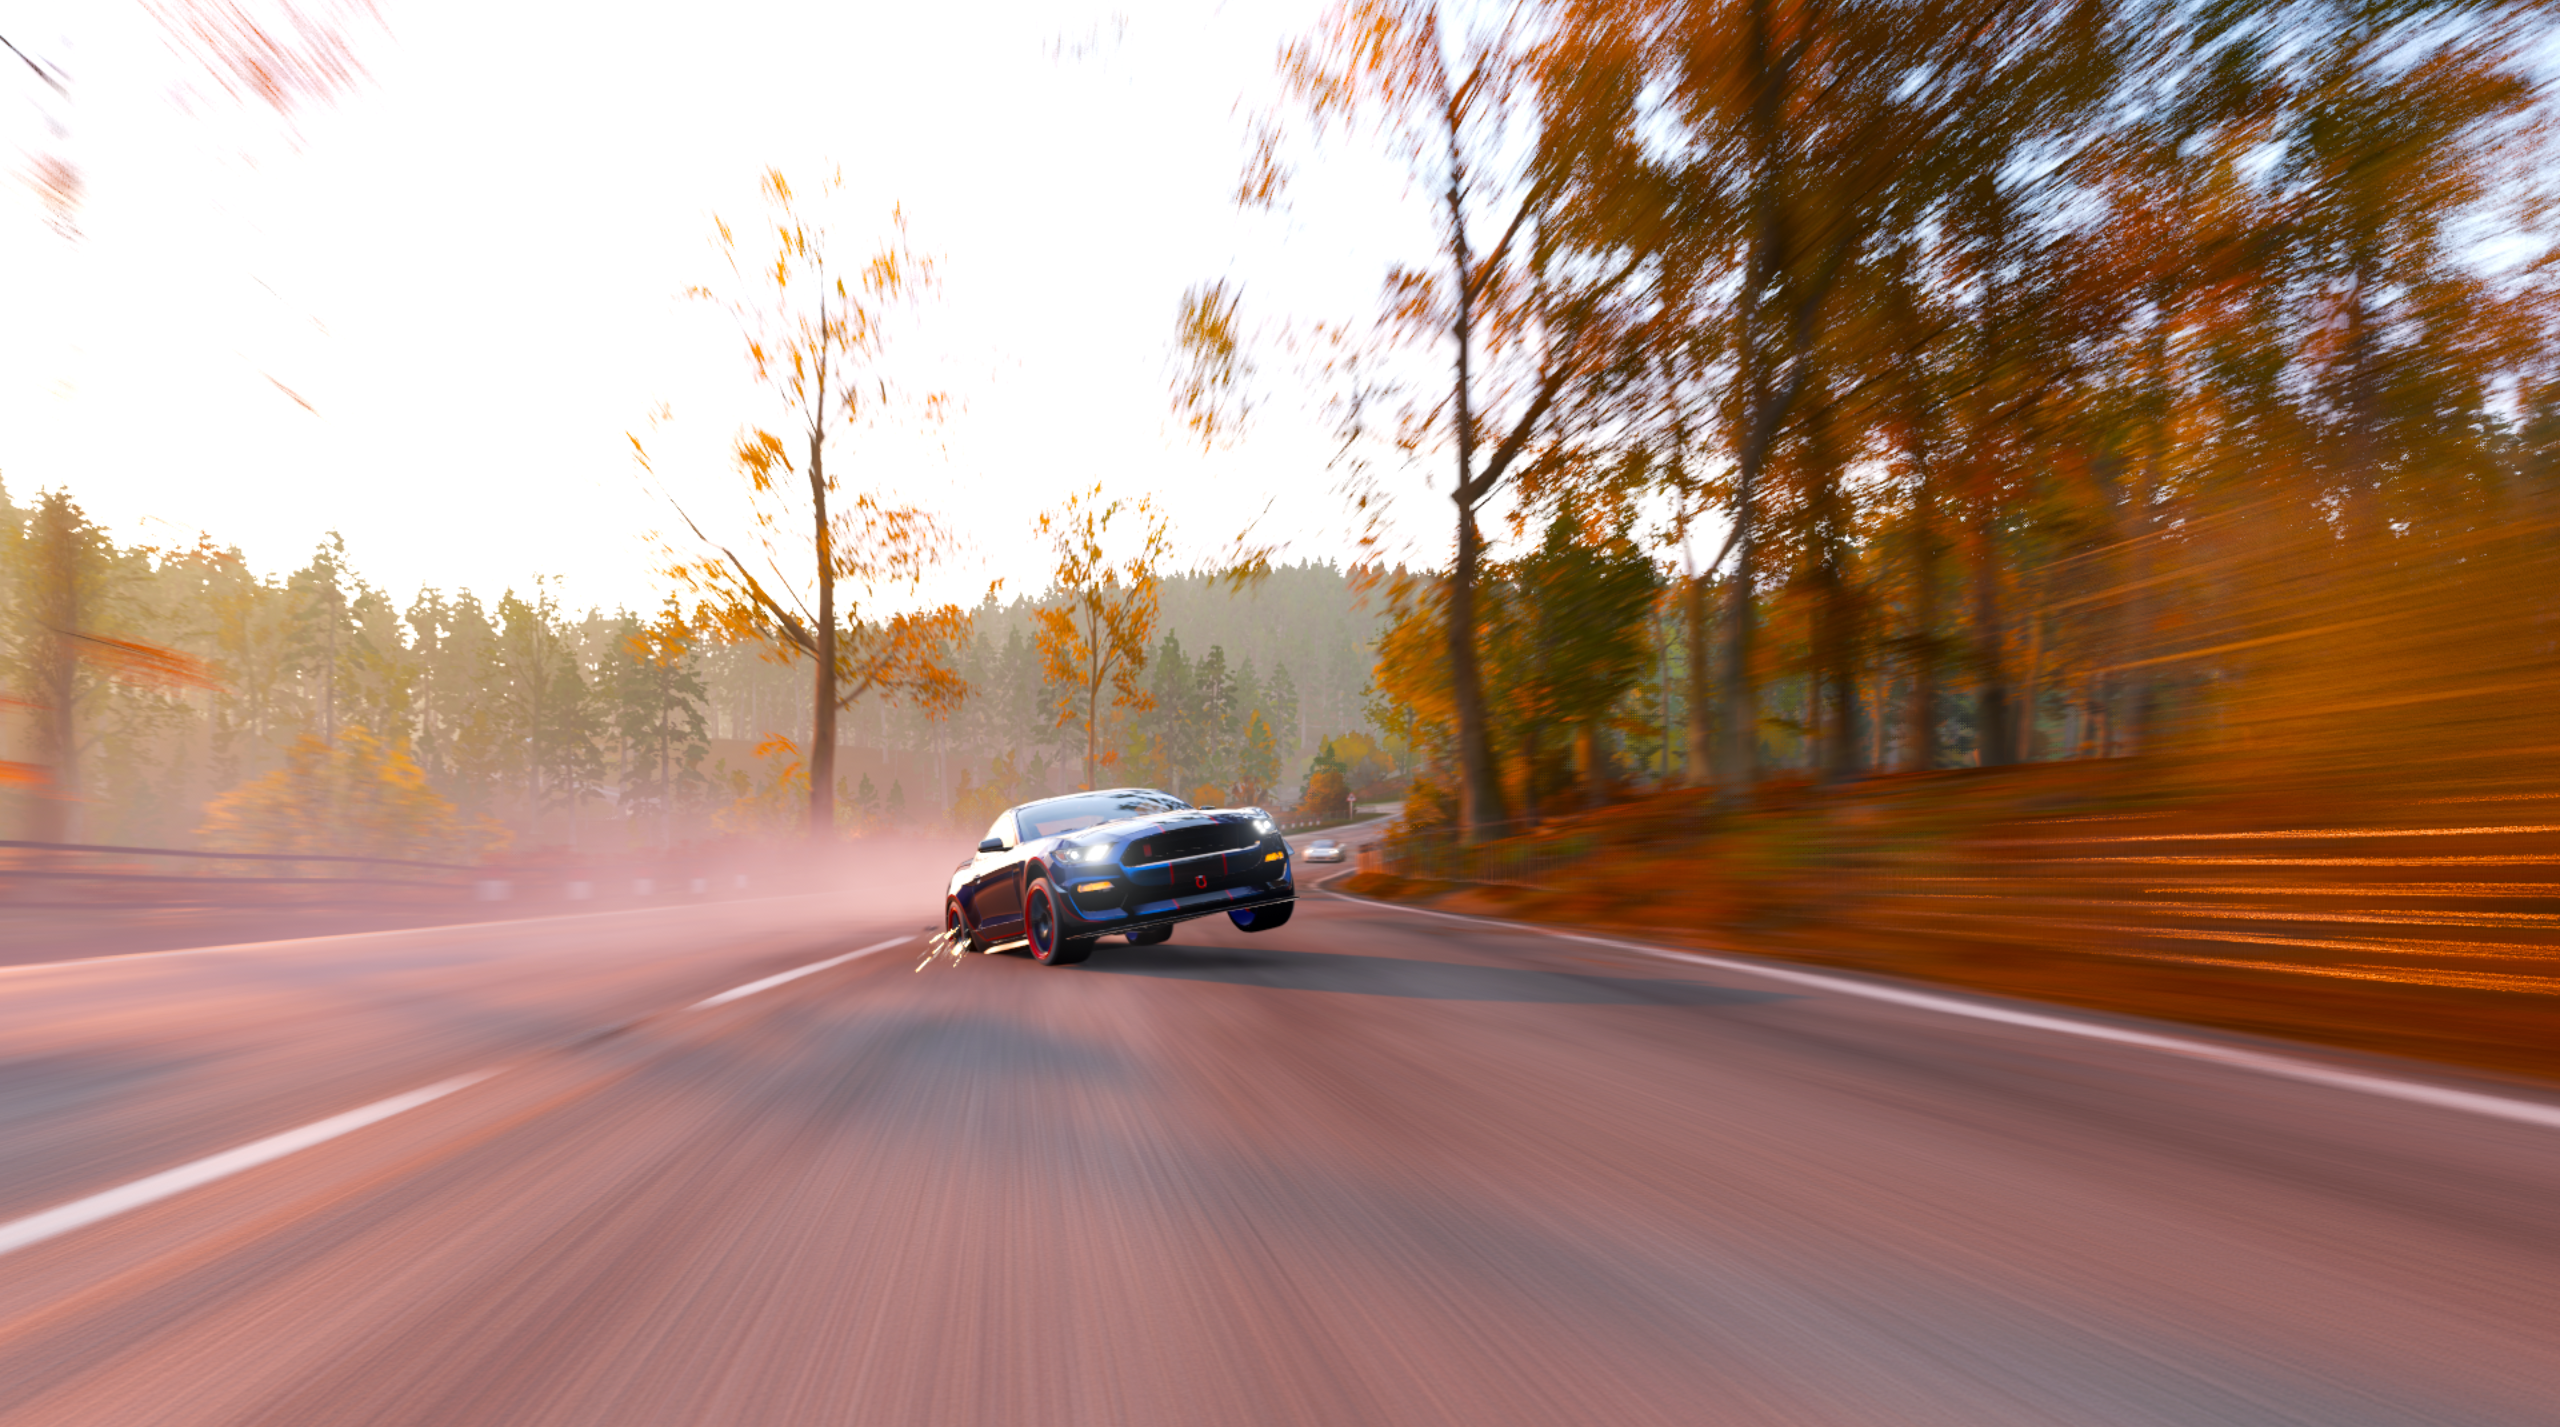 General 2560x1427 Autumn Boar spark speed-limit car high view LED headlight sinking red trees highway Fly frontal view headlights road motion blur Ford Ford Mustang Ford Mustang Shelby Shelby muscle cars American cars Forza Horizon 4 video games PlaygroundGames